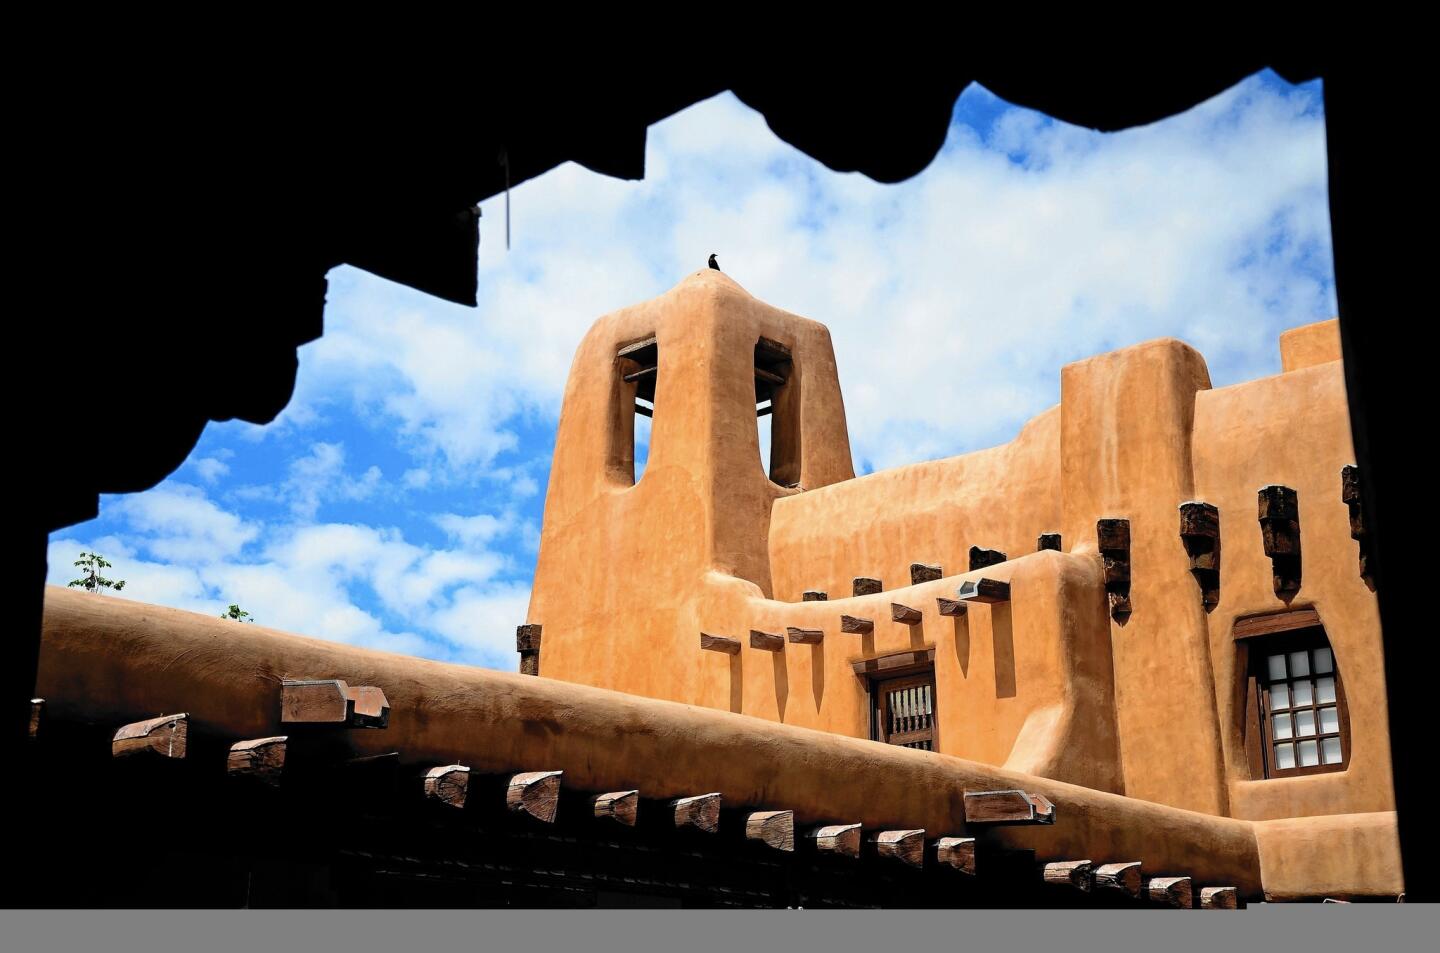 The New Mexico Museum of Art exemplifies the distinctive architecture of Santa Fe.